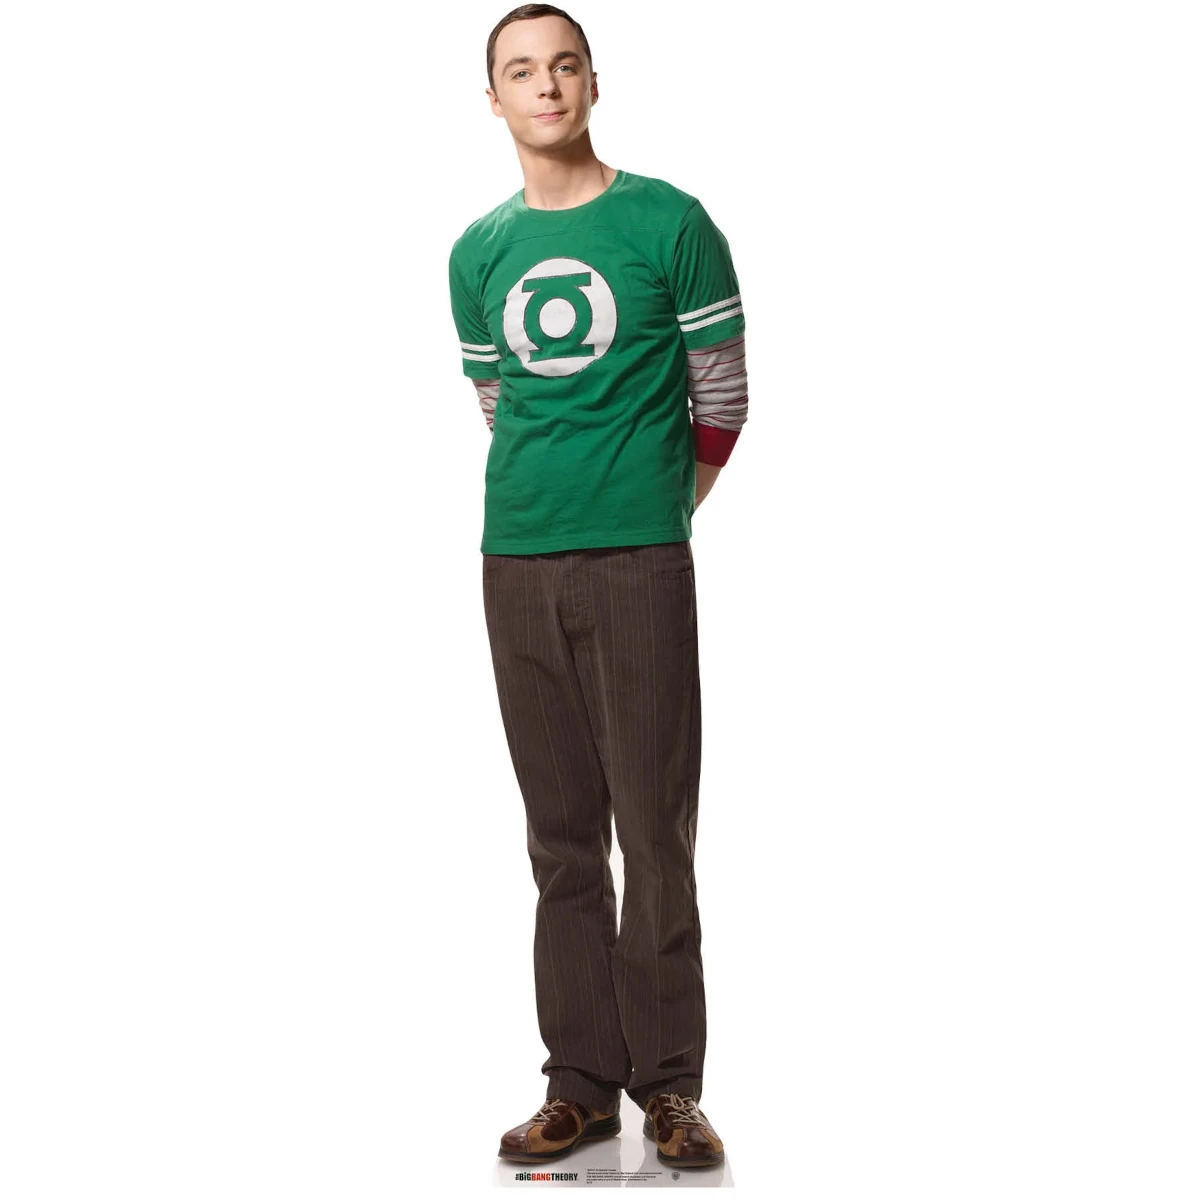 SC618 Dr Sheldon Cooper (The Big Bang Theory) Official Lifesize Cardboard Cutout Standee Front